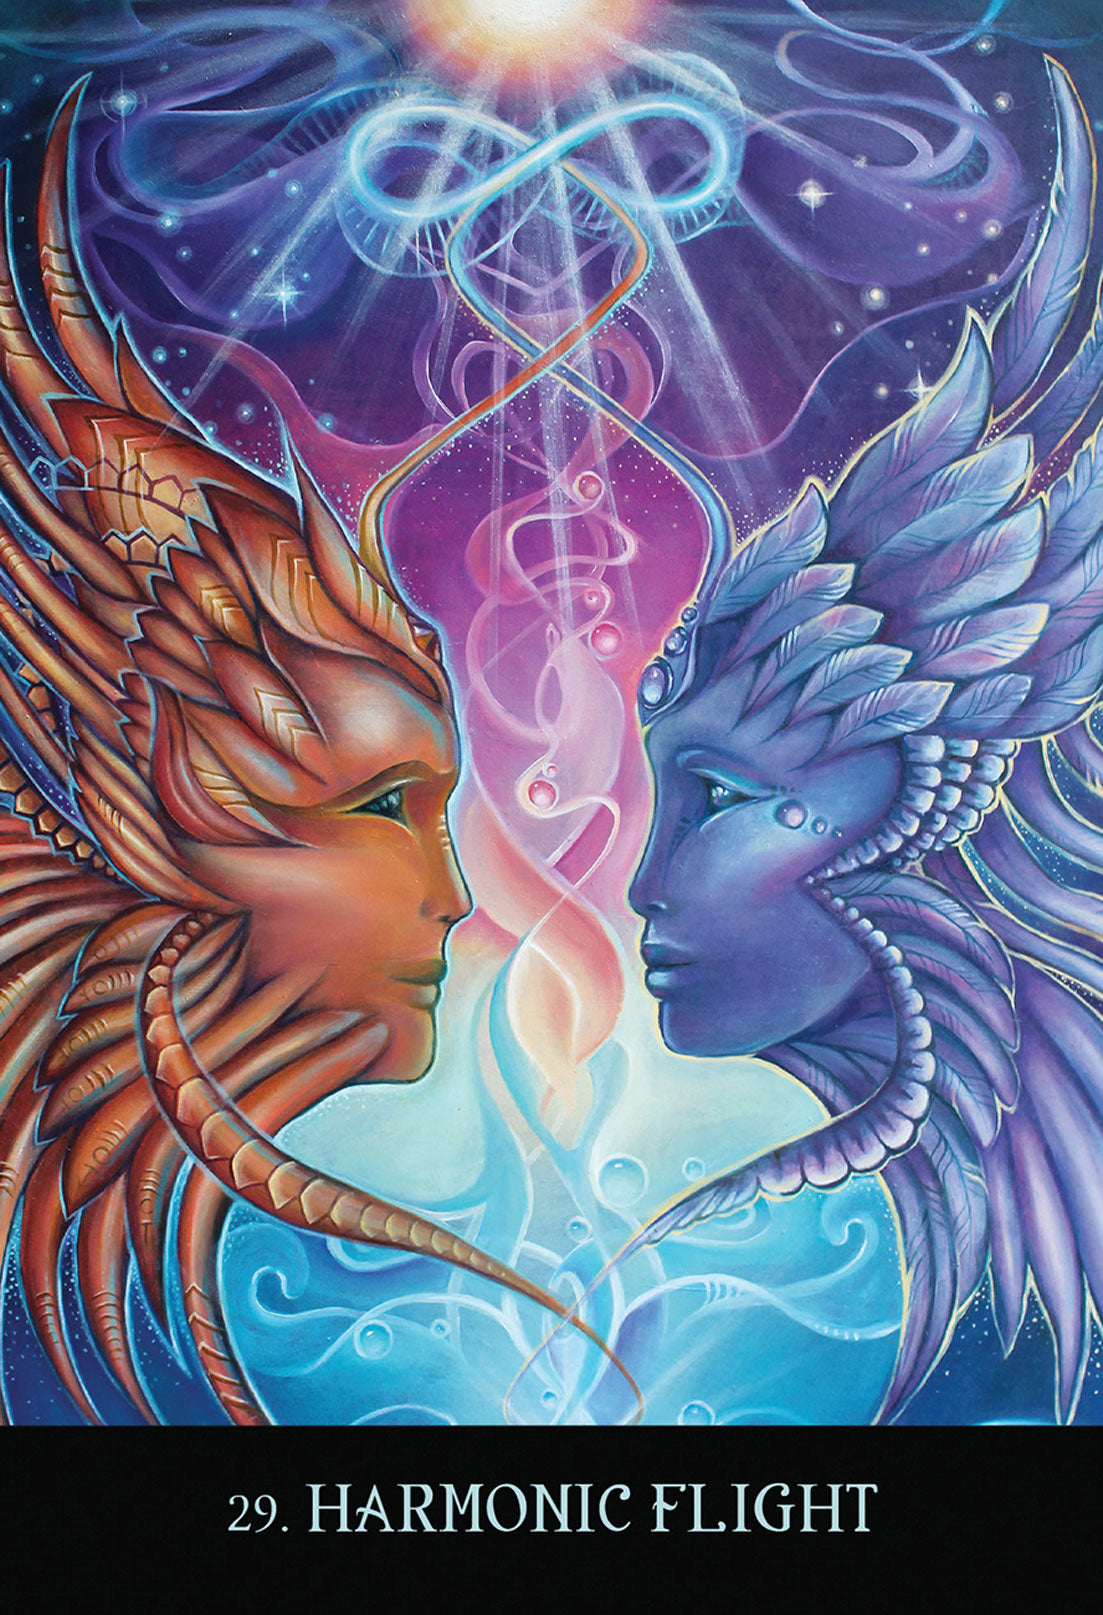 Card labeled "Harmonic Flight." Card depicts two faces, one covered in orange feathers the other in blue feathers, looking at each other longingly. Above them is a shining infinity symbol.